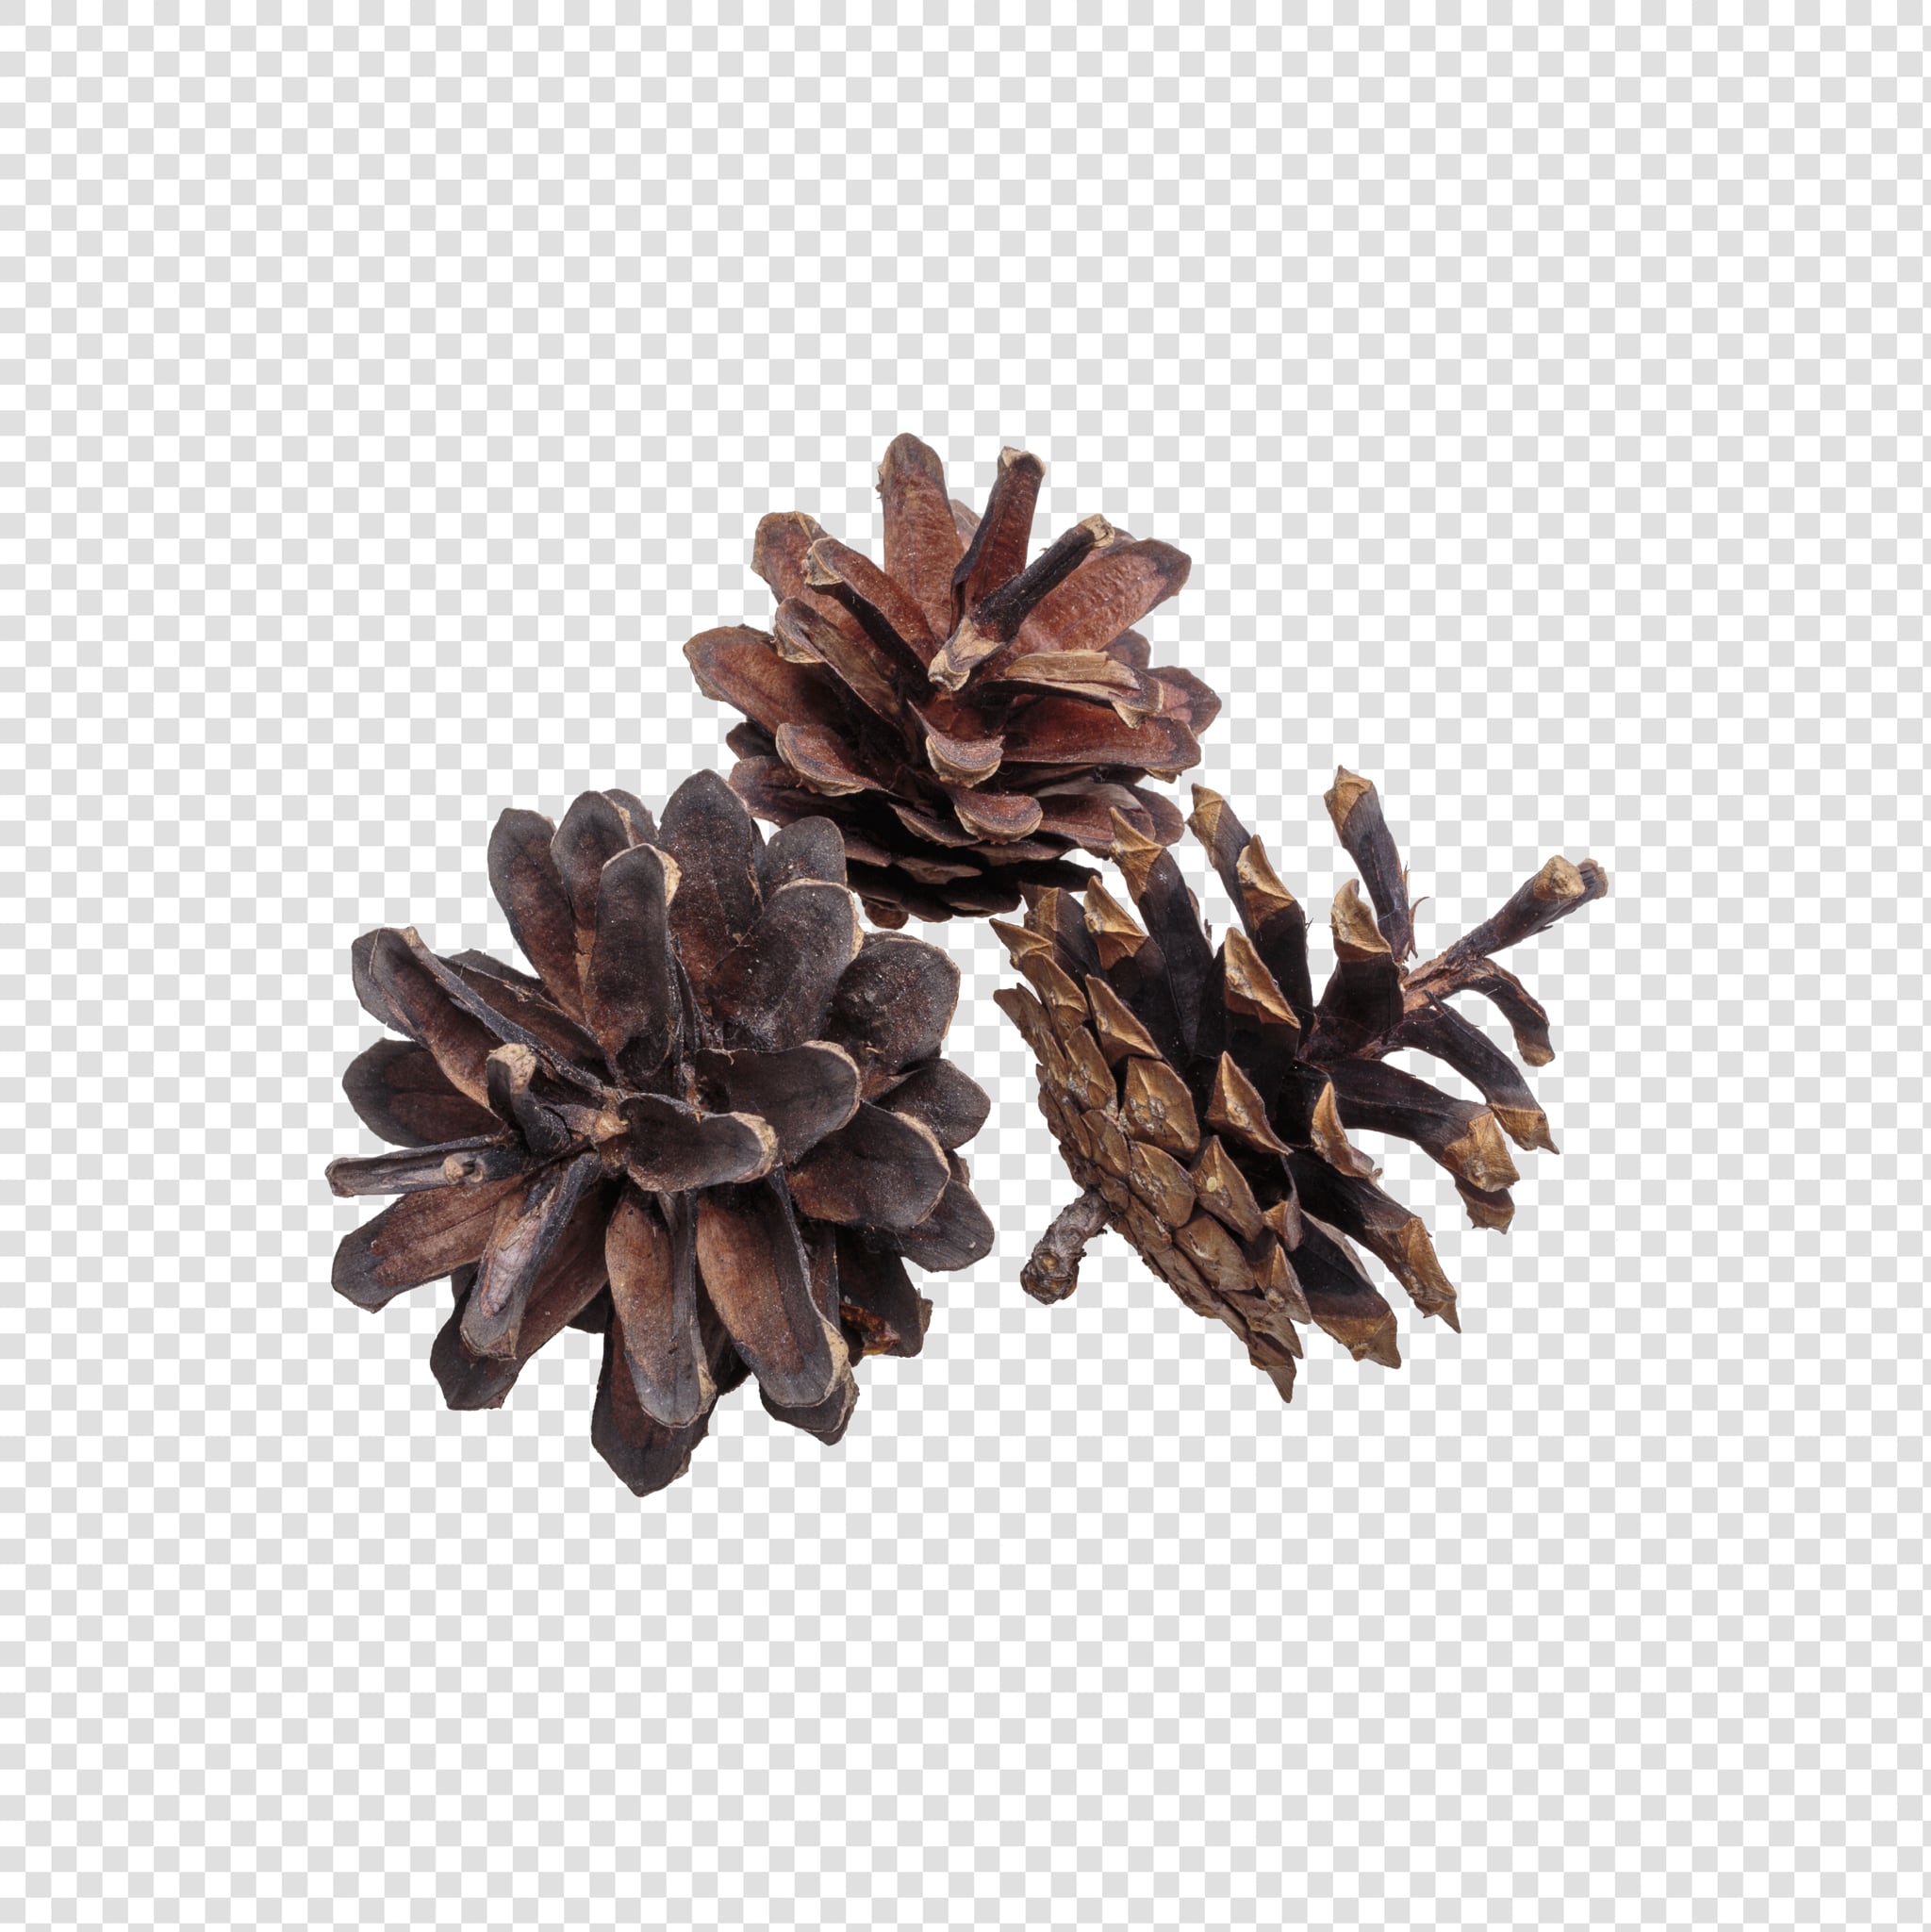 Dried flower PSD layered image